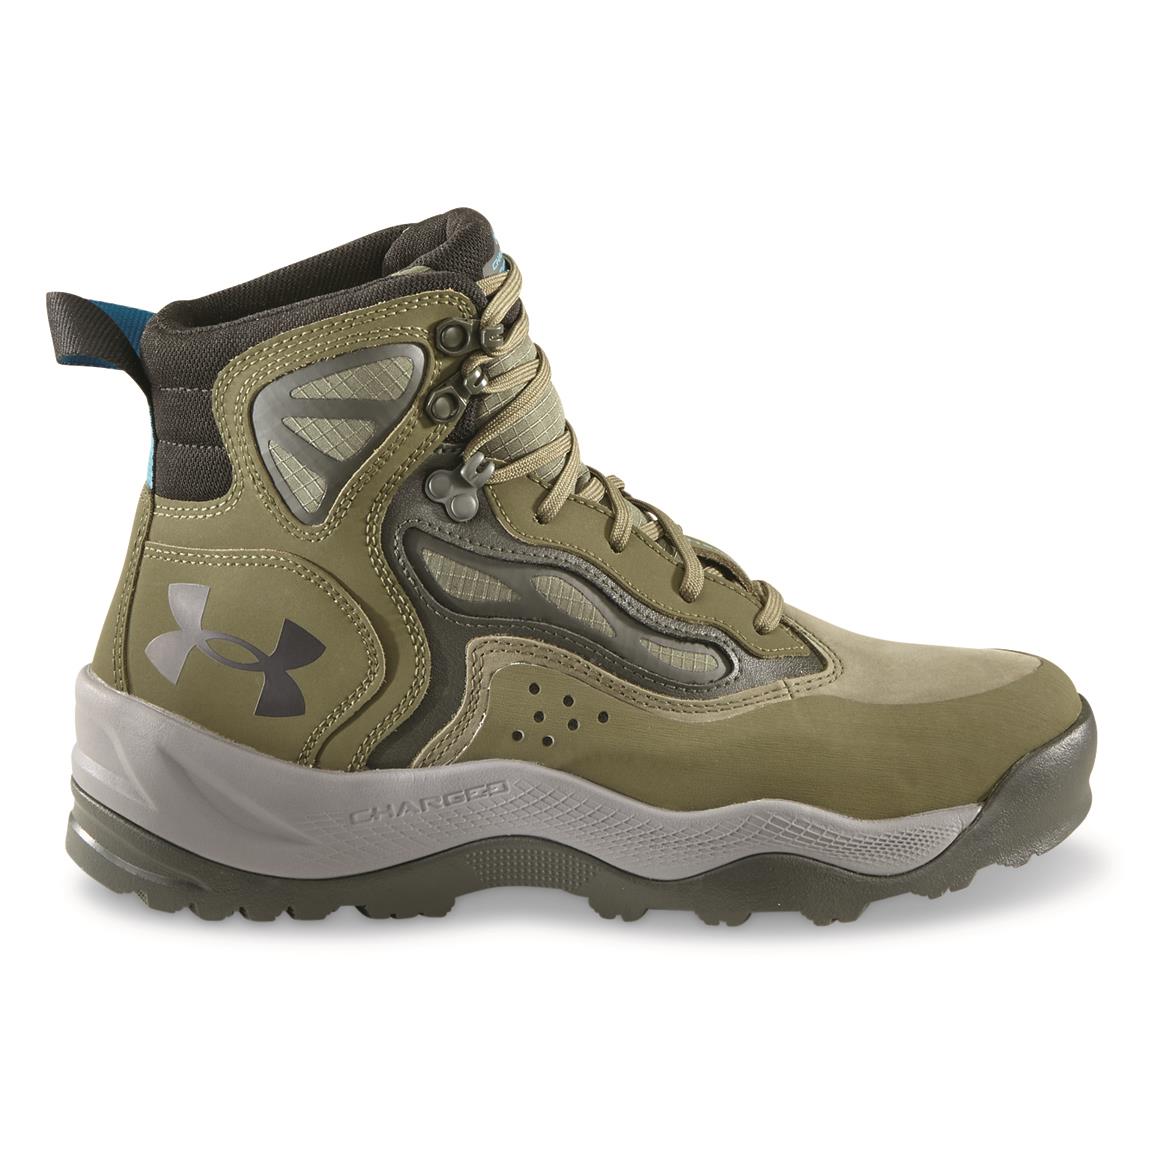 Under Armour Leather Waterproof Boots | Sportsman's Guide